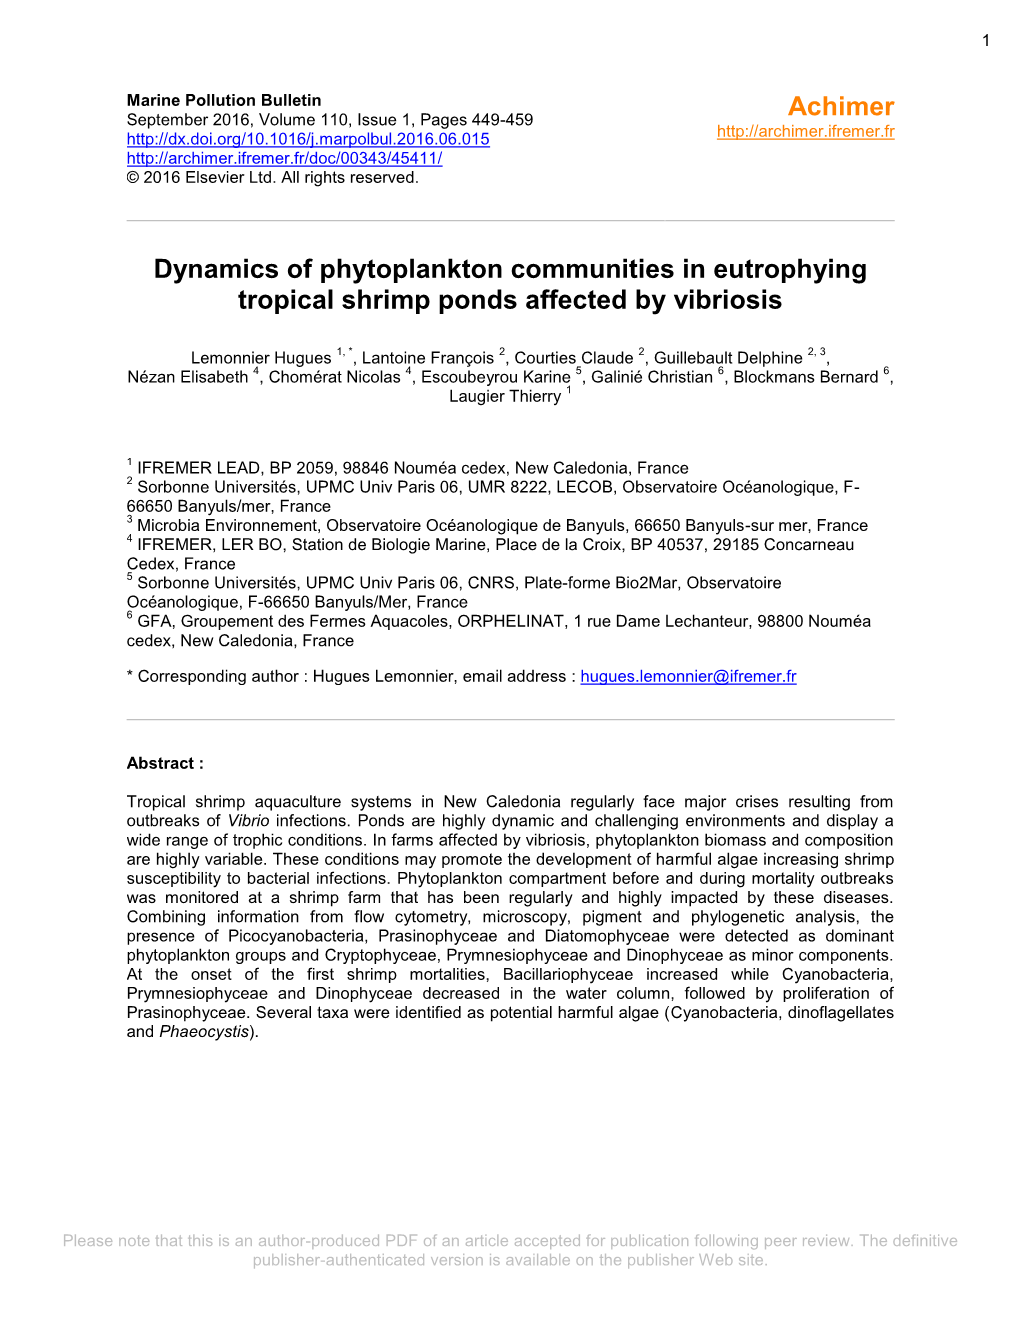 Dynamics of Phytoplankton Communities in Eutrophying Tropical Shrimp Ponds Affected by Vibriosis